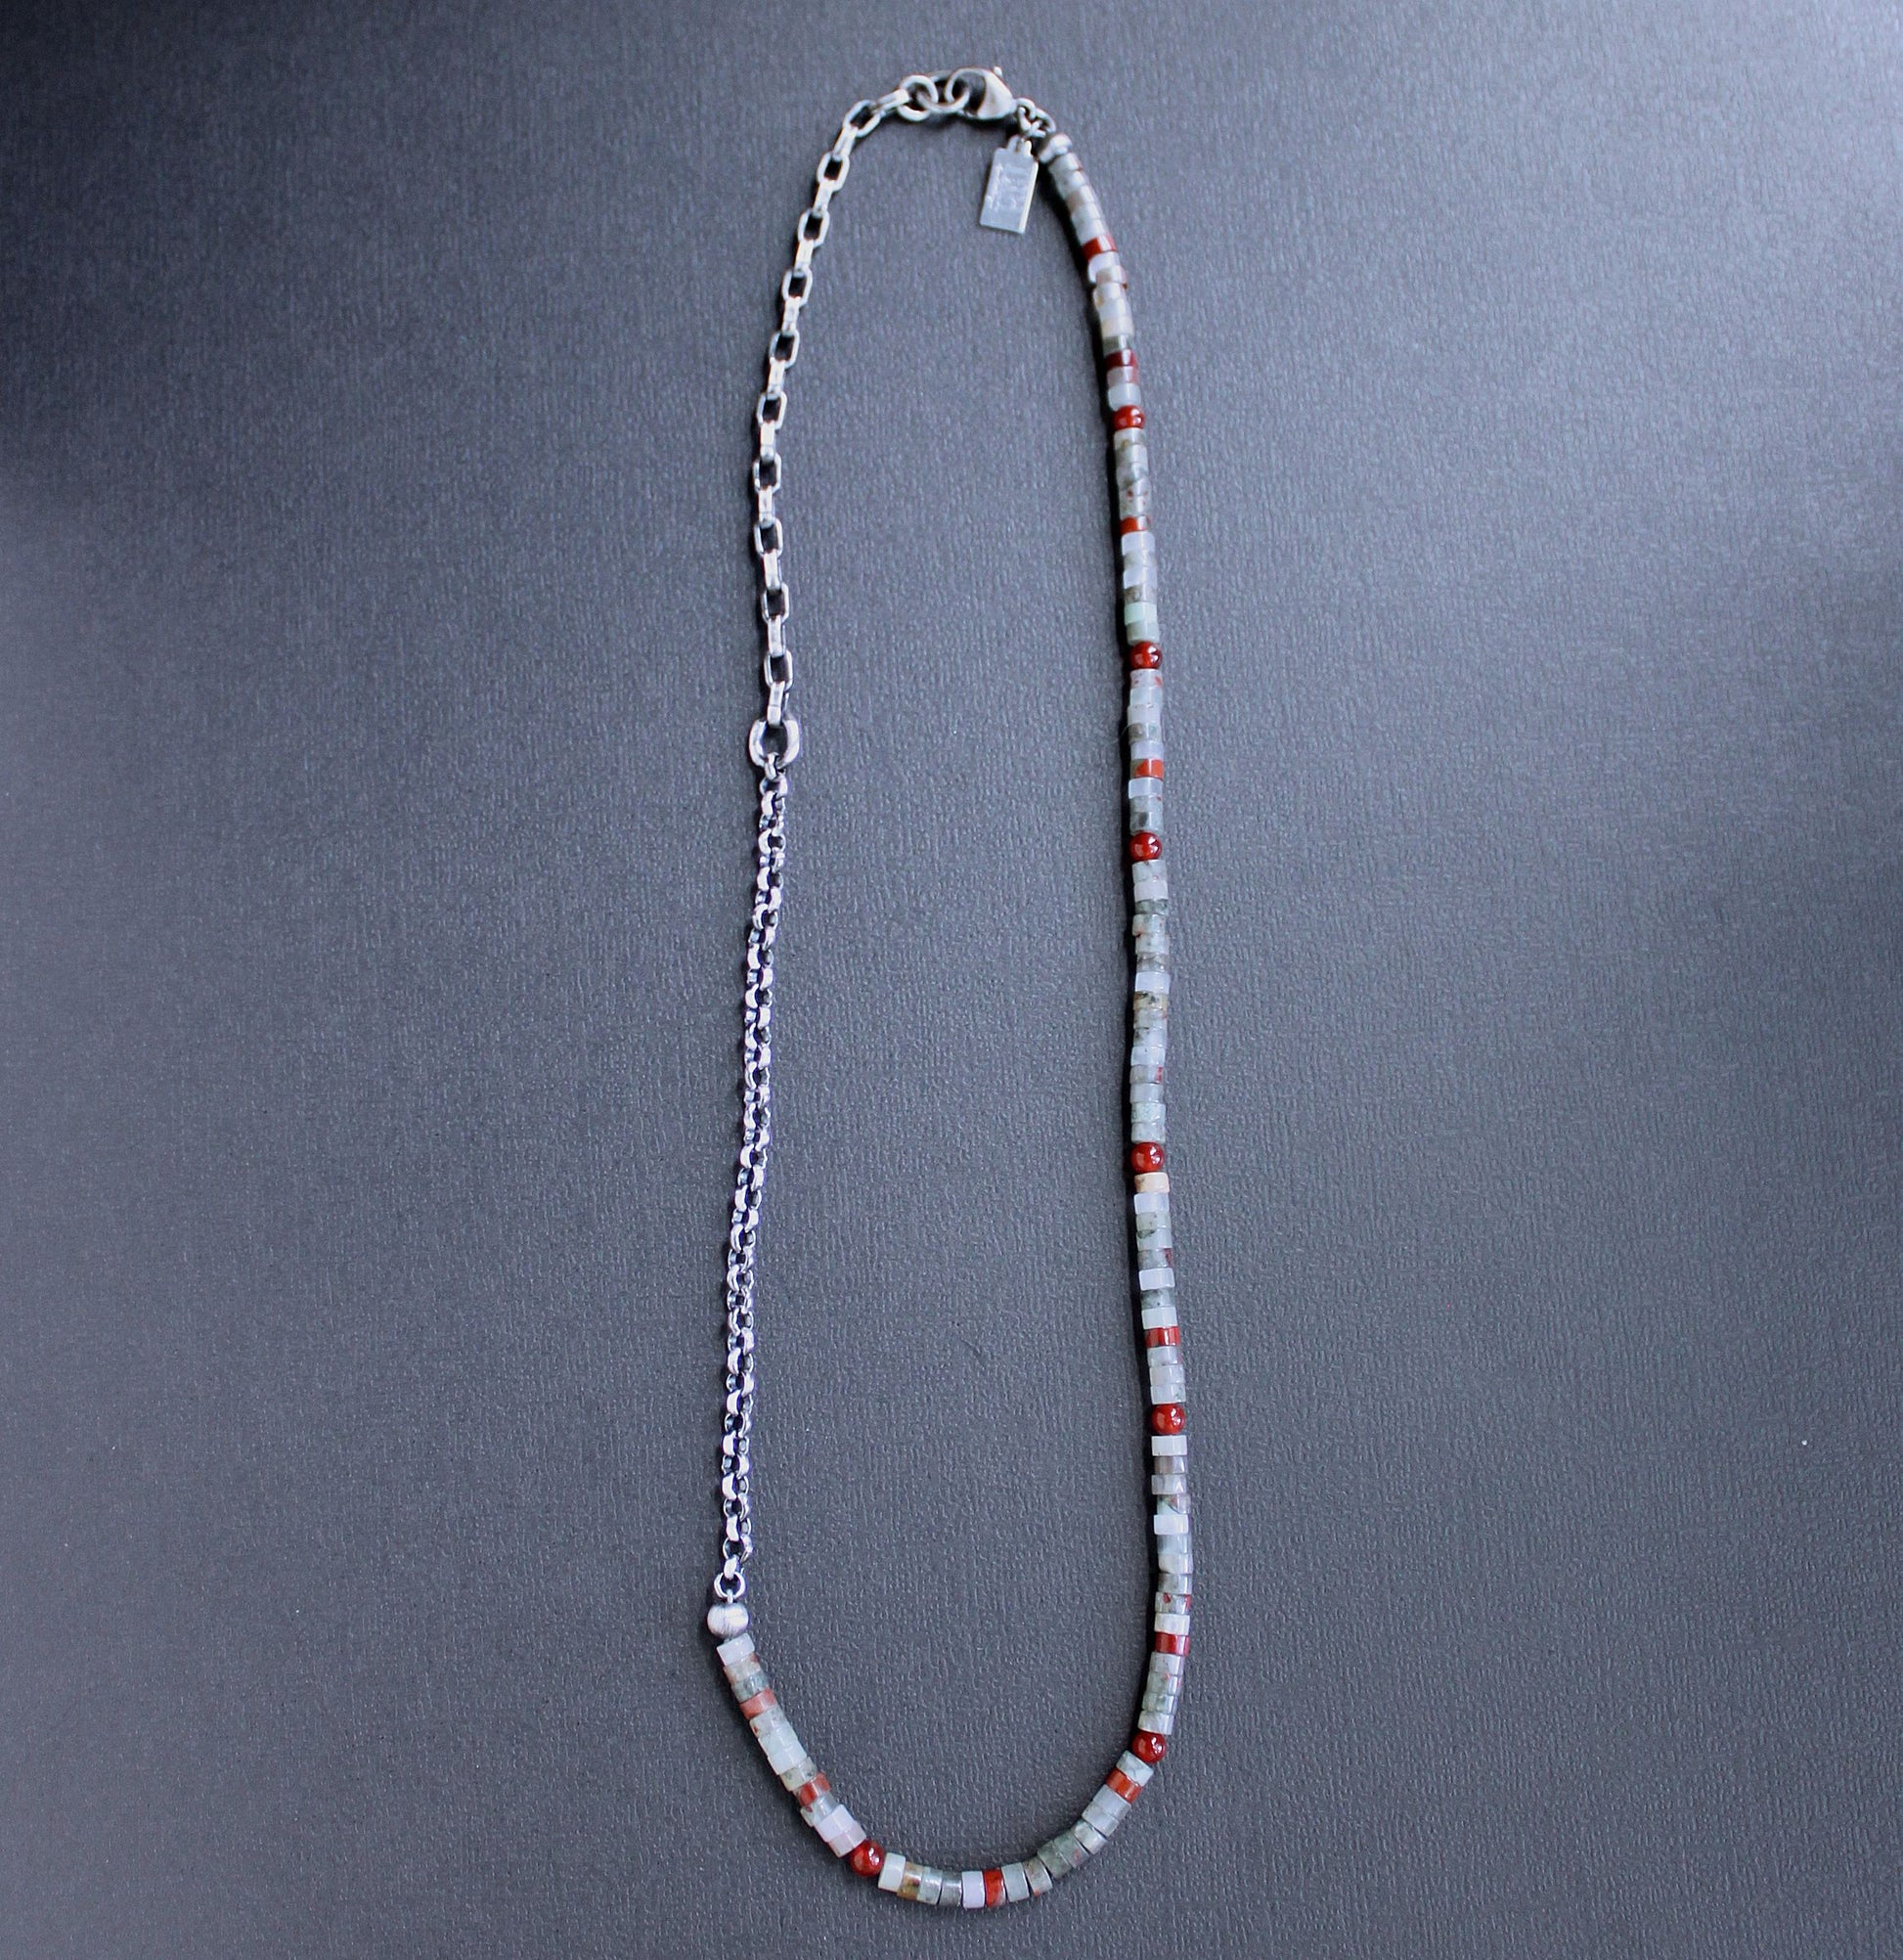 Bloodstone bead and chain necklace